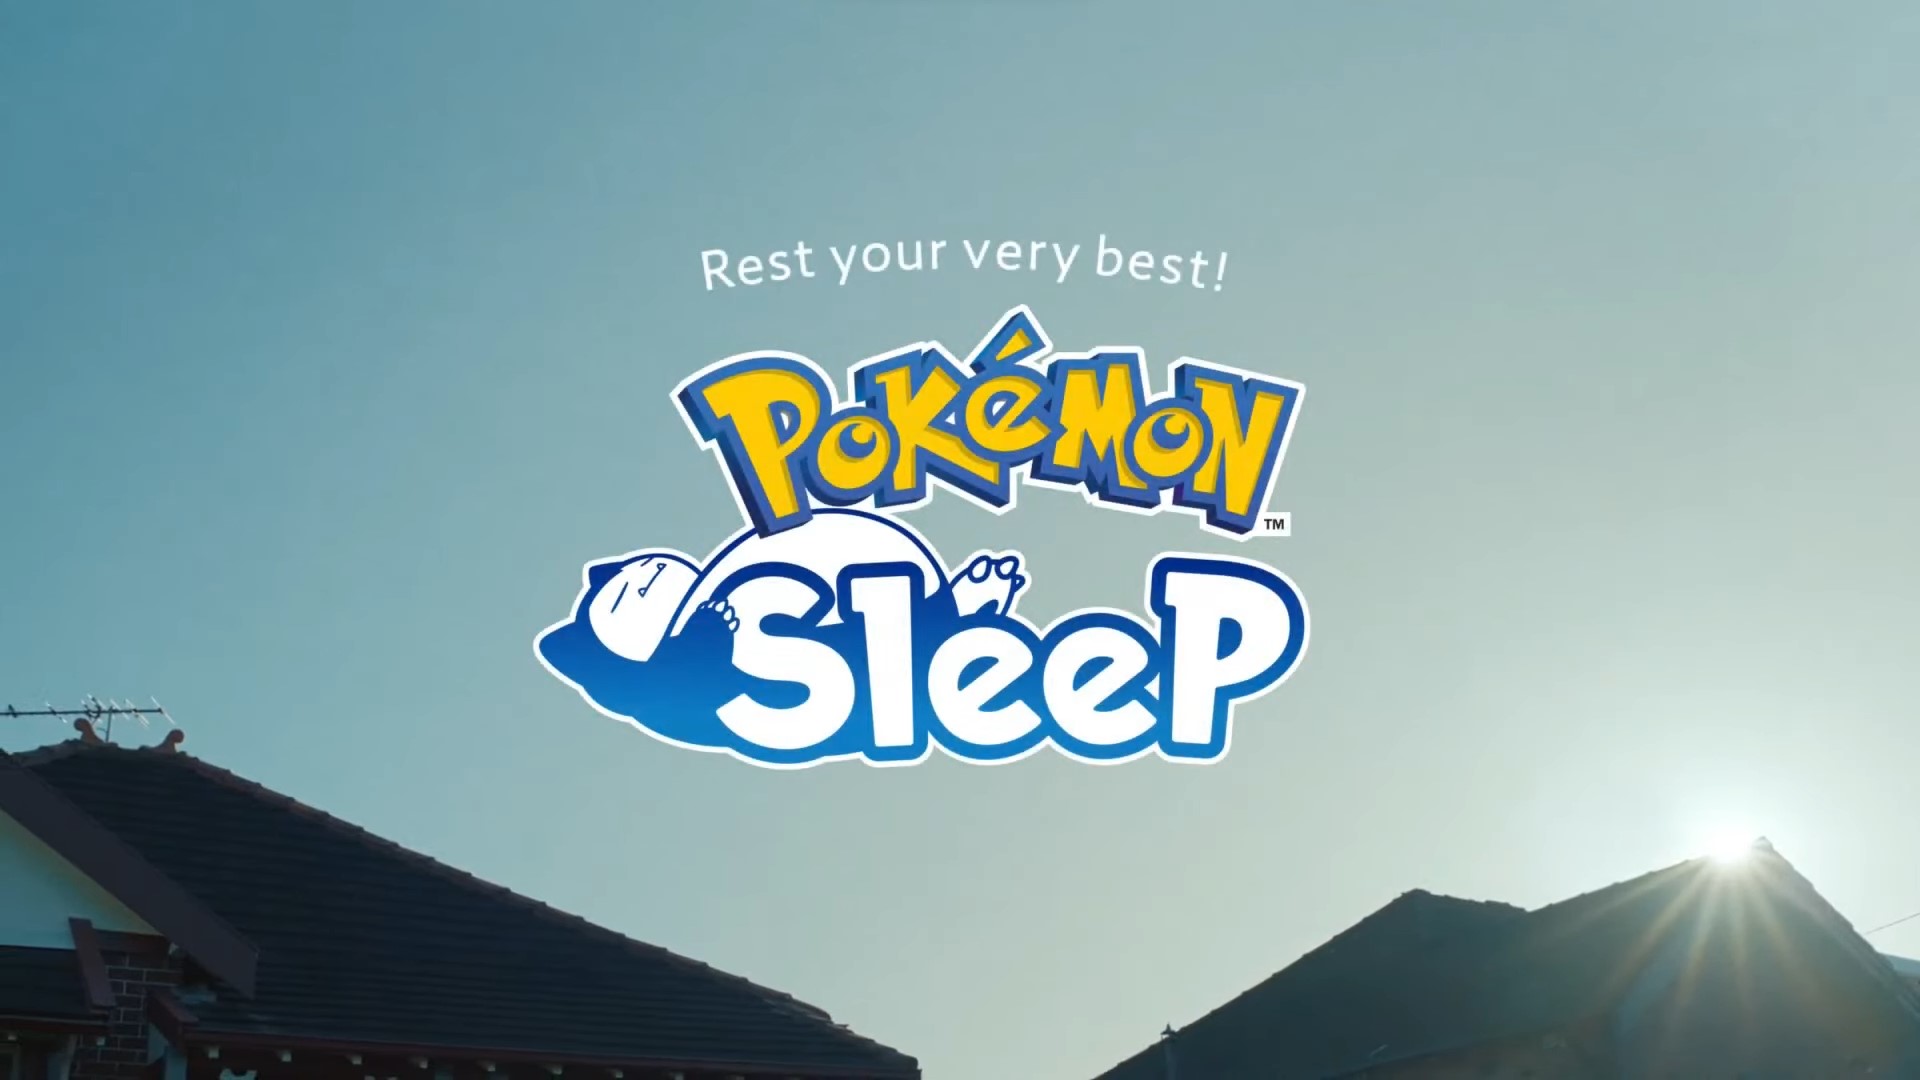 The Pokémon Sleep app is finally releasing later this year